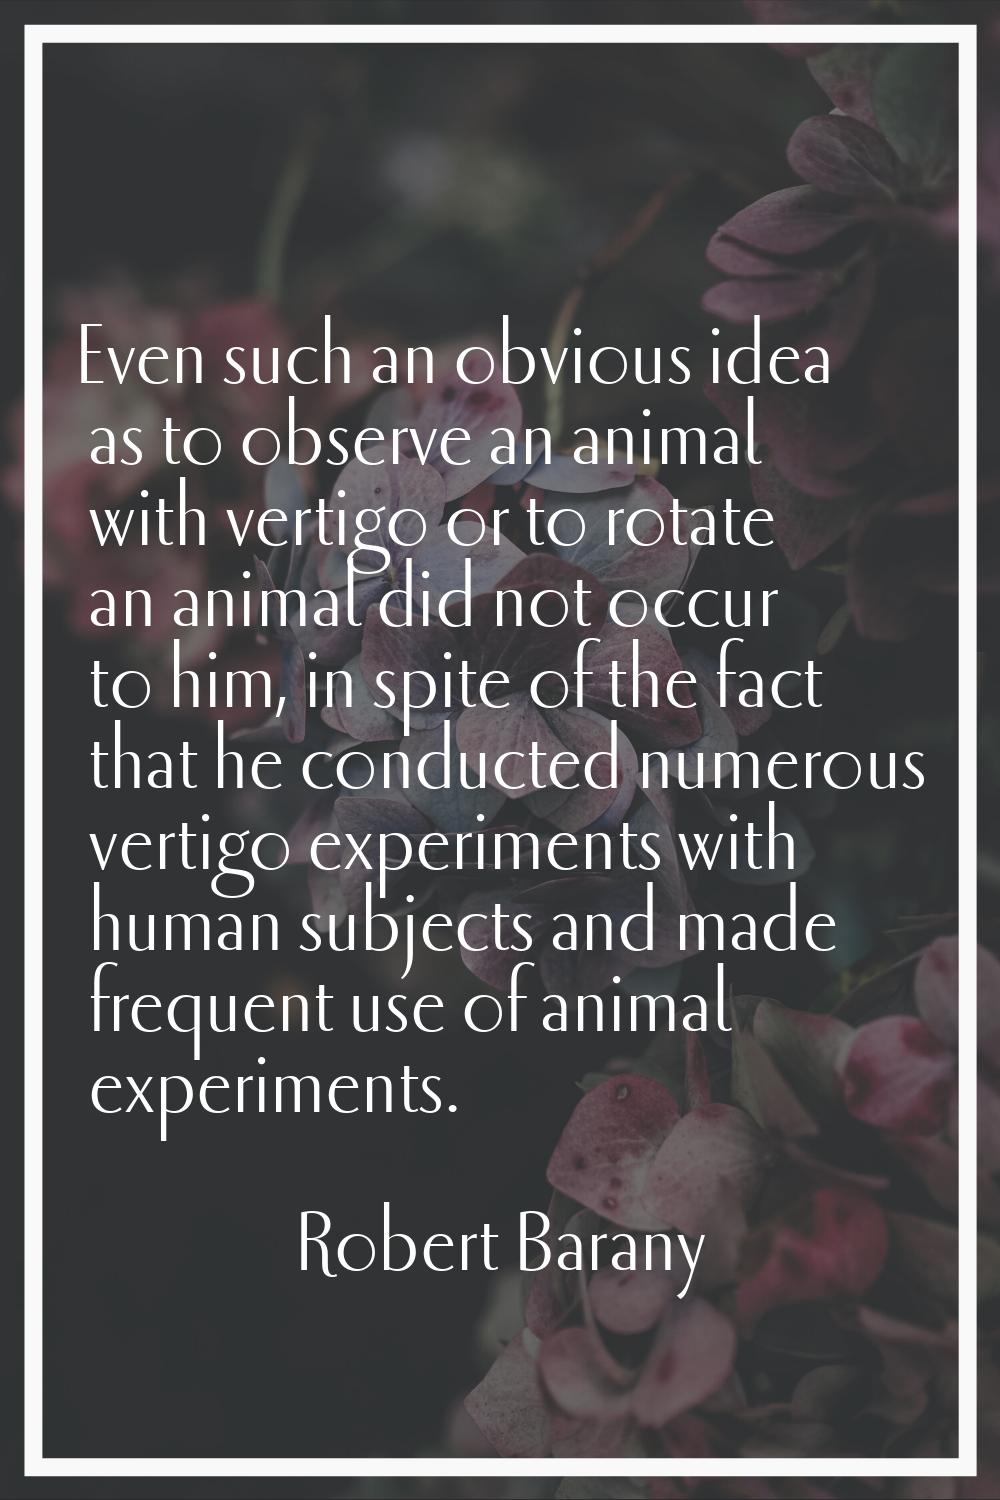 Even such an obvious idea as to observe an animal with vertigo or to rotate an animal did not occur